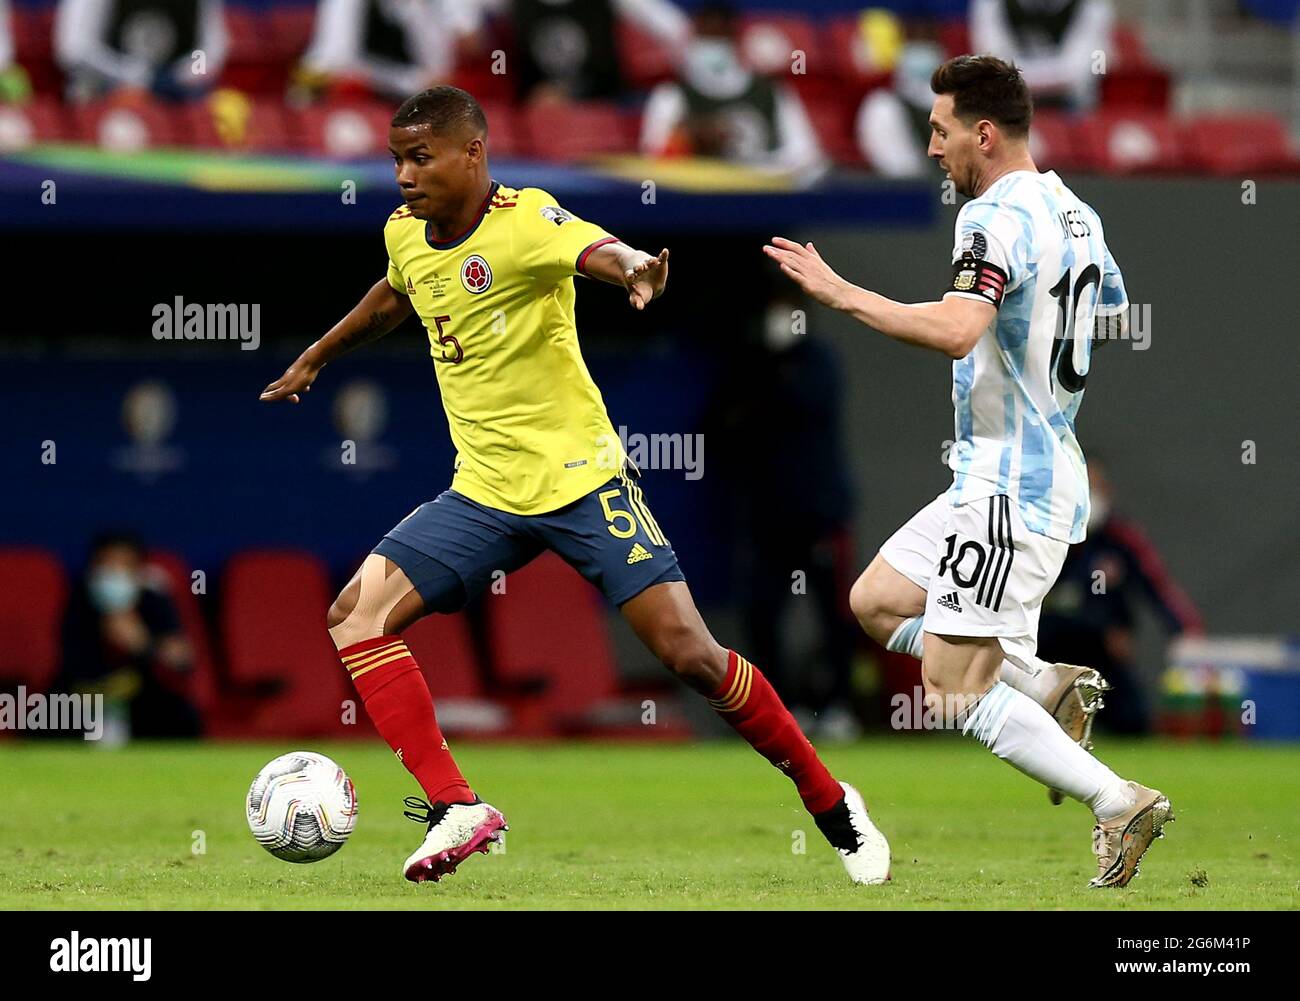 BRASILIA, BRAZIL - JULY 06: Wilmar Barrios of Colombia competes for the ball with Lionel Messi of Argentina ,during the Semifinal match between Argentina and Colombia as part of Conmebol Copa America Brazil 2021 at Mane Garrincha Stadium on July 6, 2021 in Brasilia, Brazil. (MB Media) Stock Photo